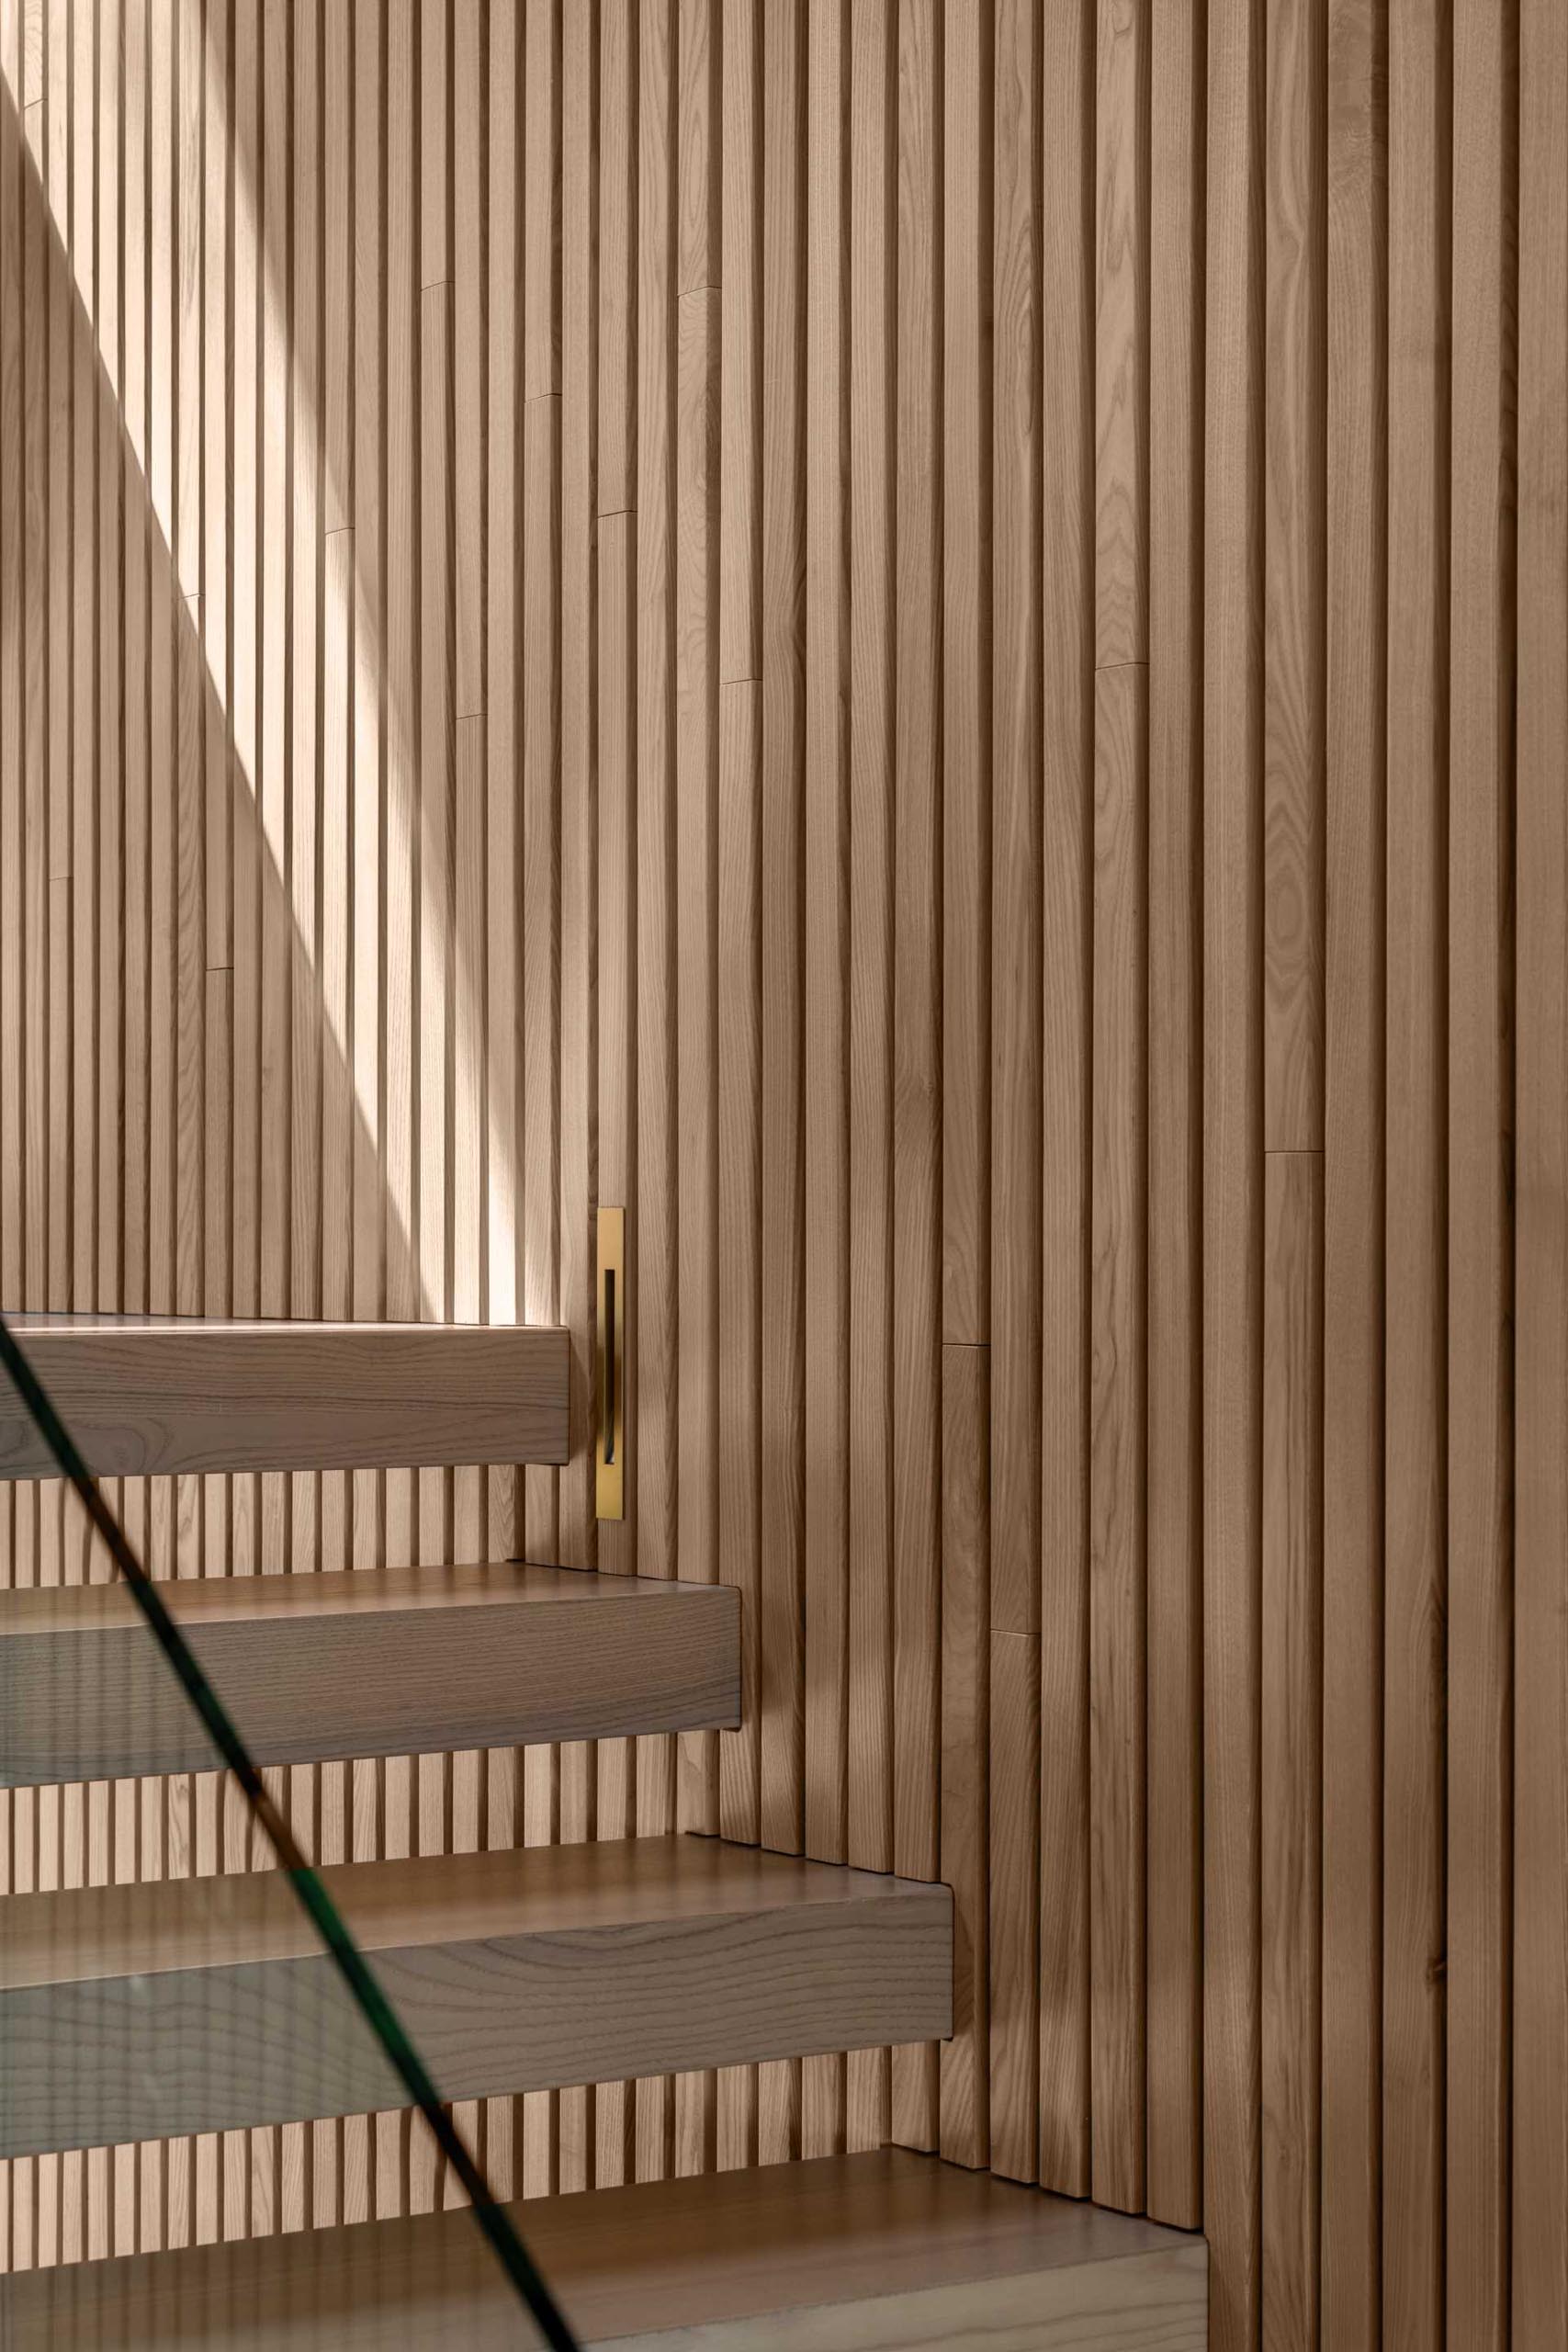 Vertical wood slats run alongside the wood stairs, while small vertical lights make it easy to travel up and down the stairs at night.